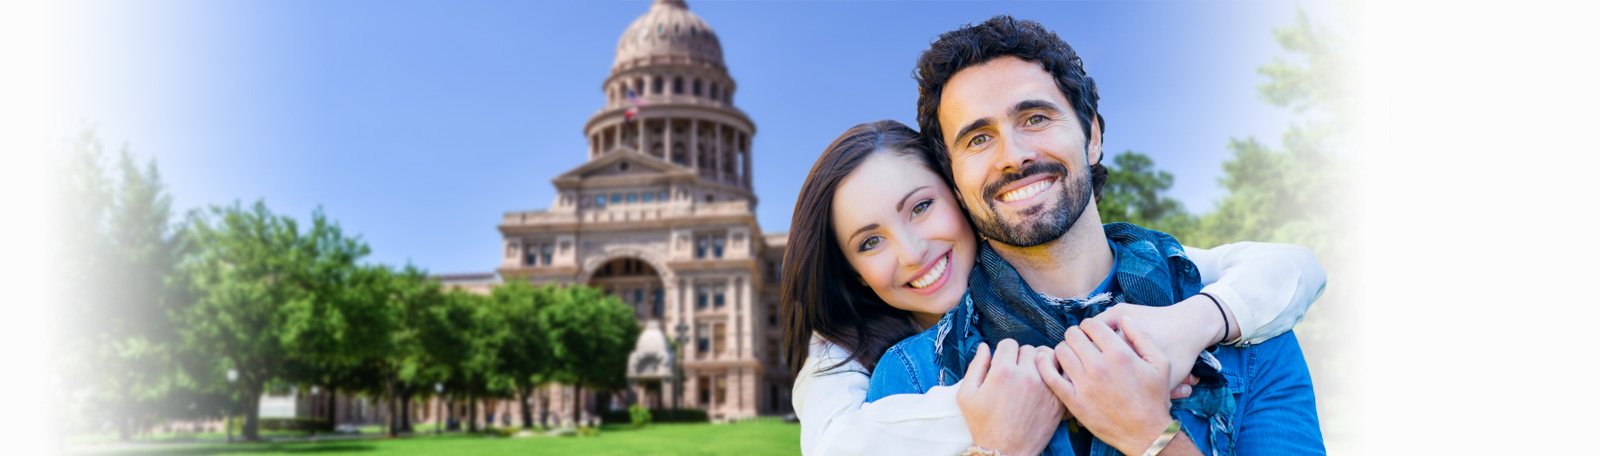 Couple at the Texas Capitol Bulding in Austin